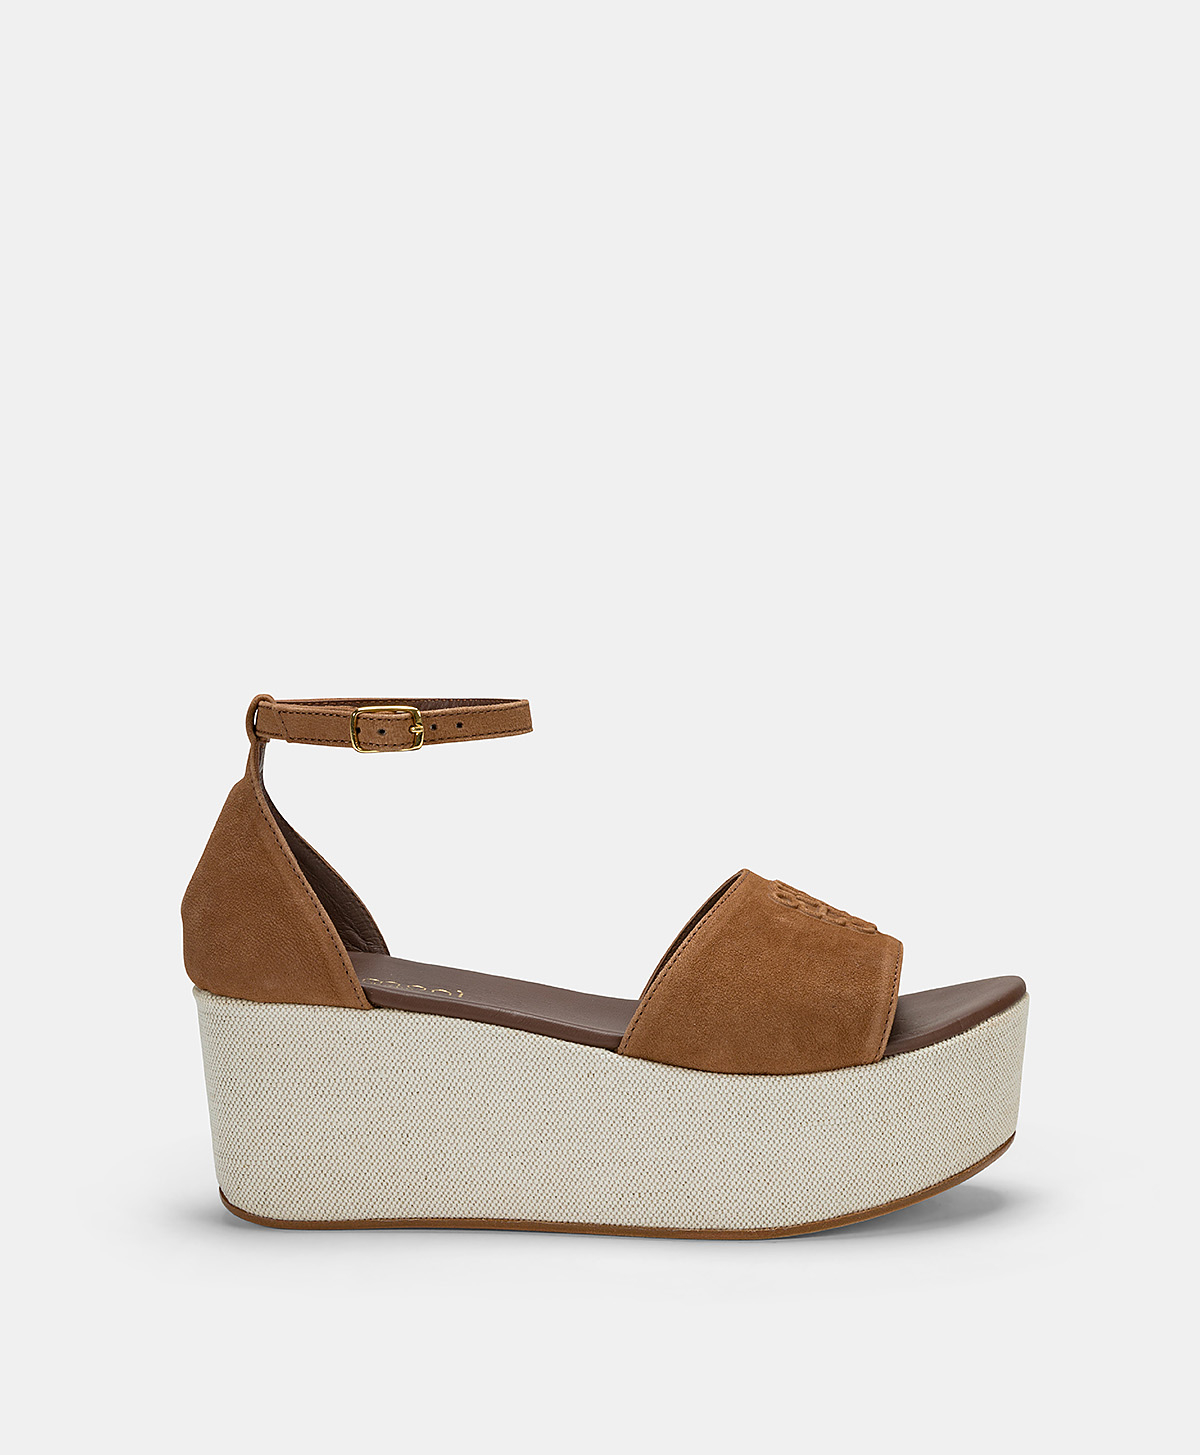 SORAYA SANDALS IN LEATHER AND CANVAS - LEATHER - Momonì